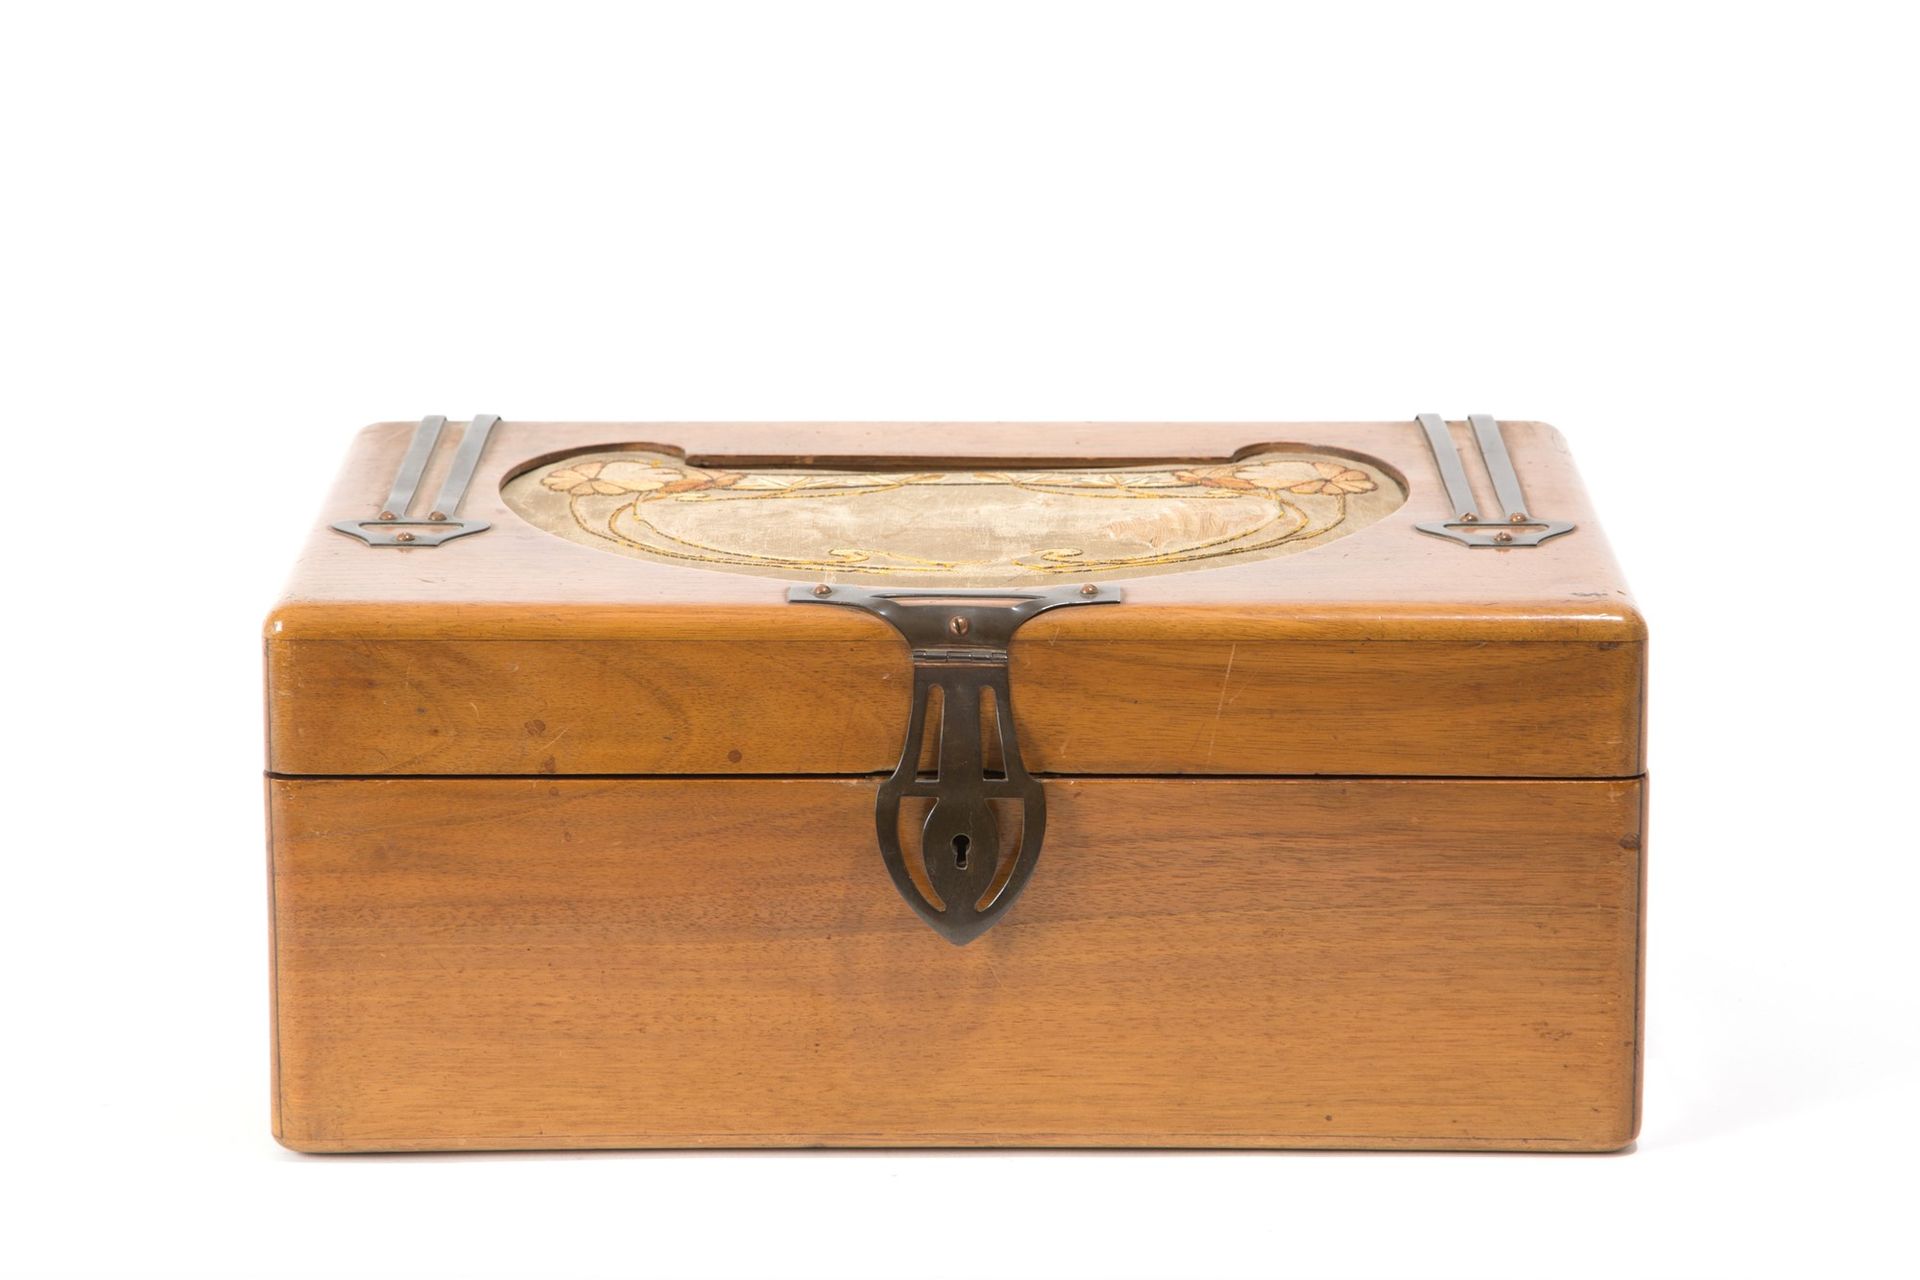 Wooden box Walnut and brass casket with small dot in center. Art Nouveau period.&hellip;